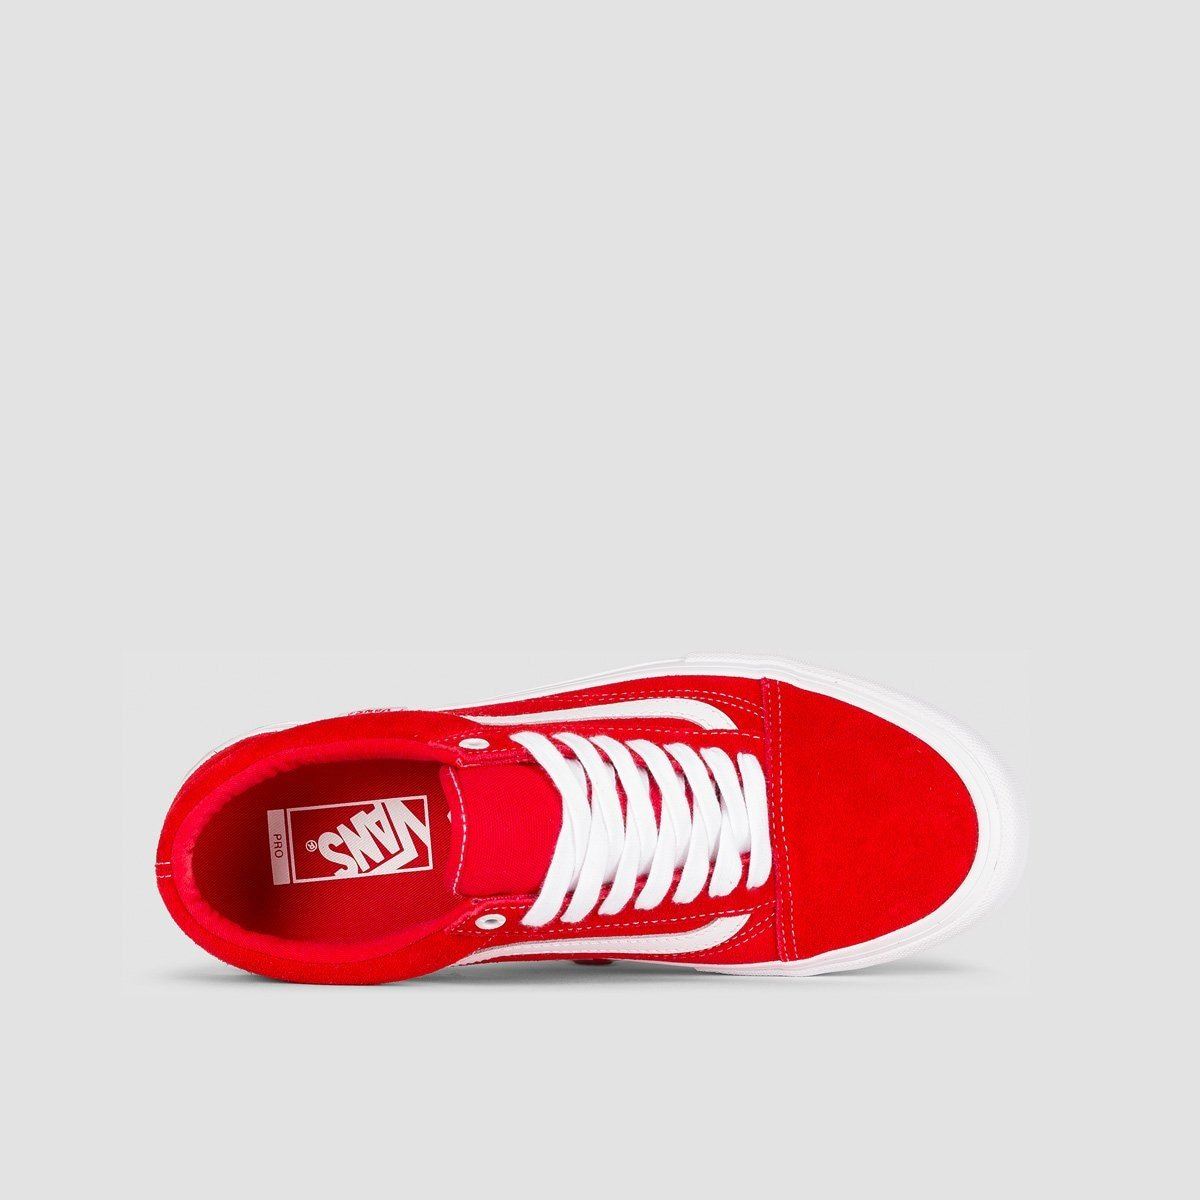 Vans Old Skool Pro Shoes - Suede Red/White